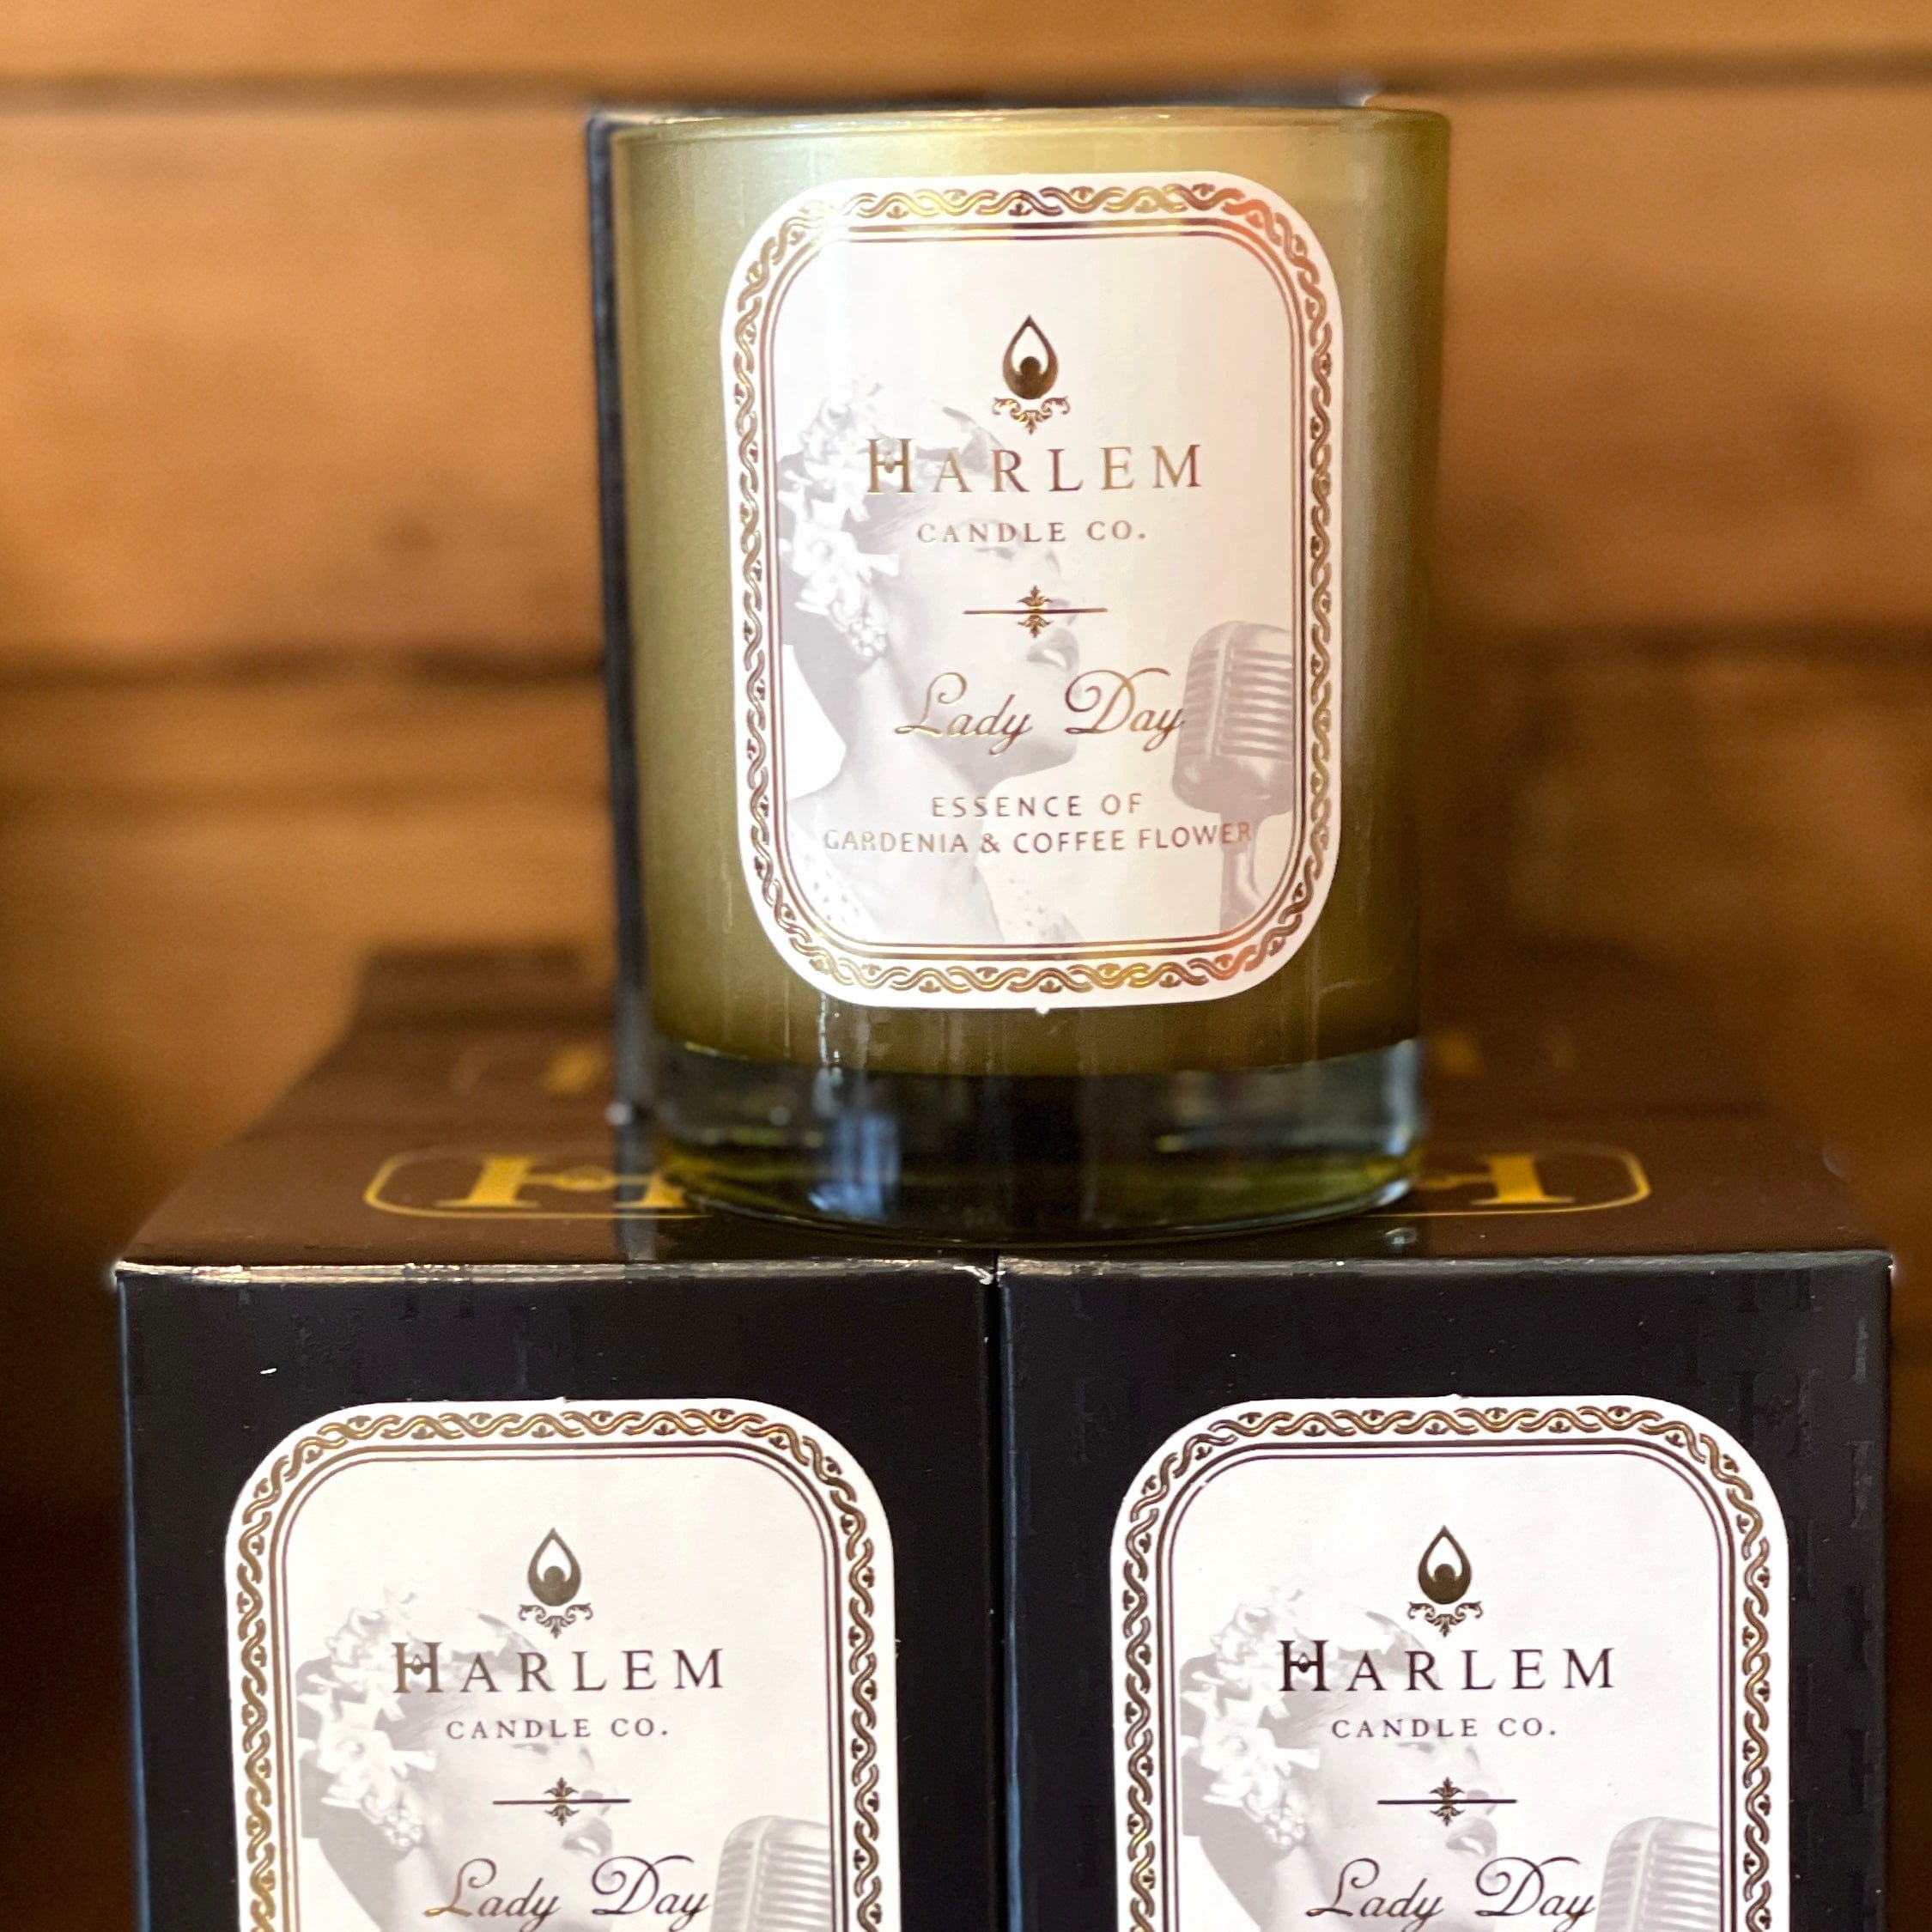 Lady Day Harlem Candle Co. Luxury Candle - PORCH